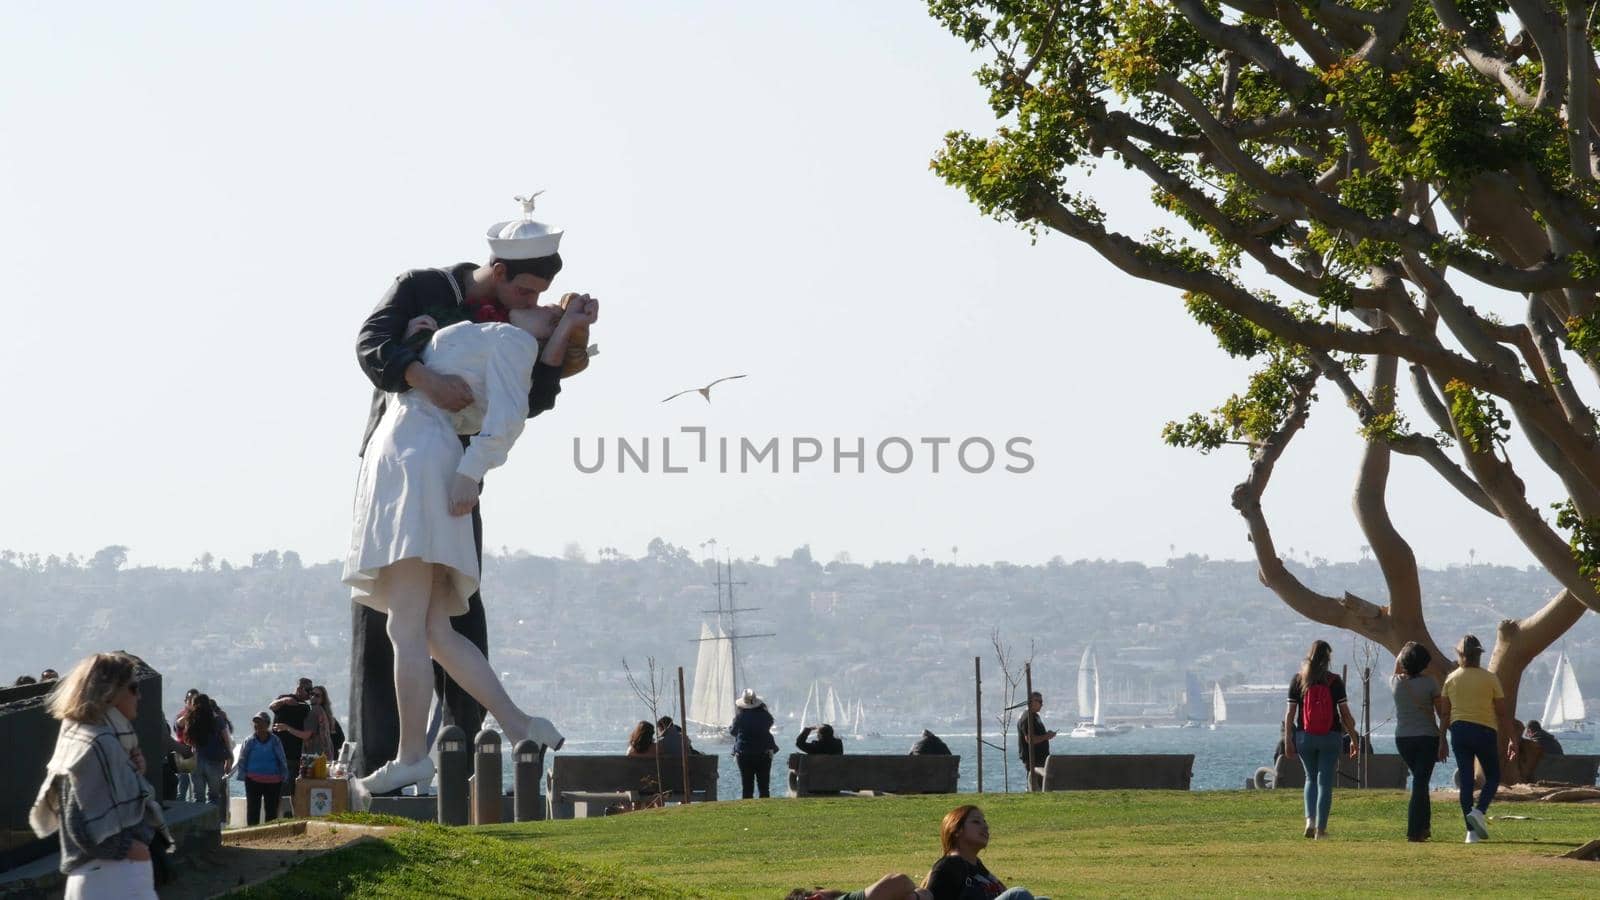 SAN DIEGO, CALIFORNIA USA - 23 FEB 2020: Unconditional Surrender Statue, USS Midway Museum. Symbol of navy fleet and Victory over Japan Day. Sailor kissing a woman, World War II memorial sculpture.